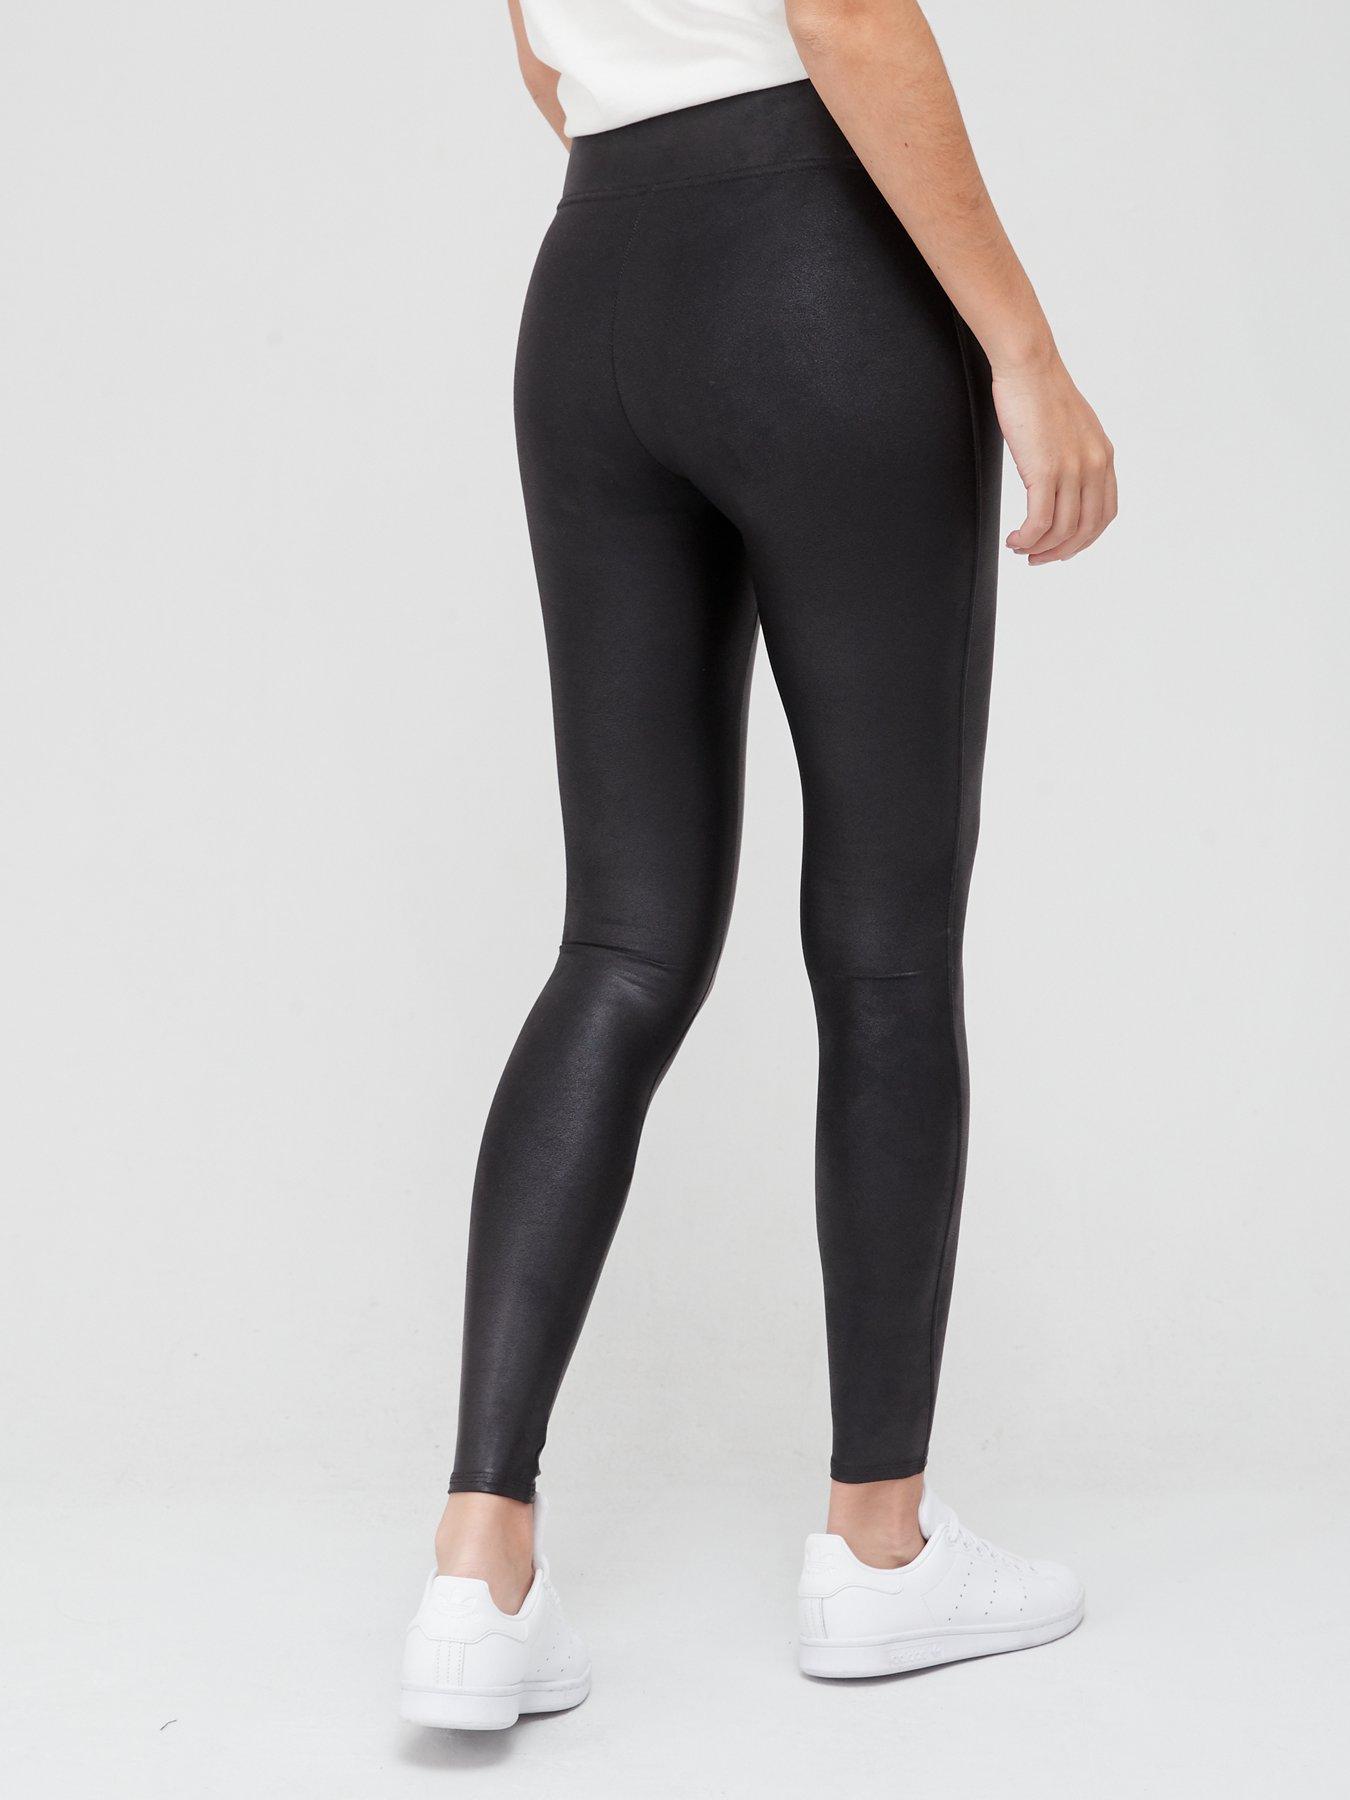 Spanx Look At Me Now Seamless High Rise Leggings: Black/Grey/Green Camo  Size M - $49 - From Michelle